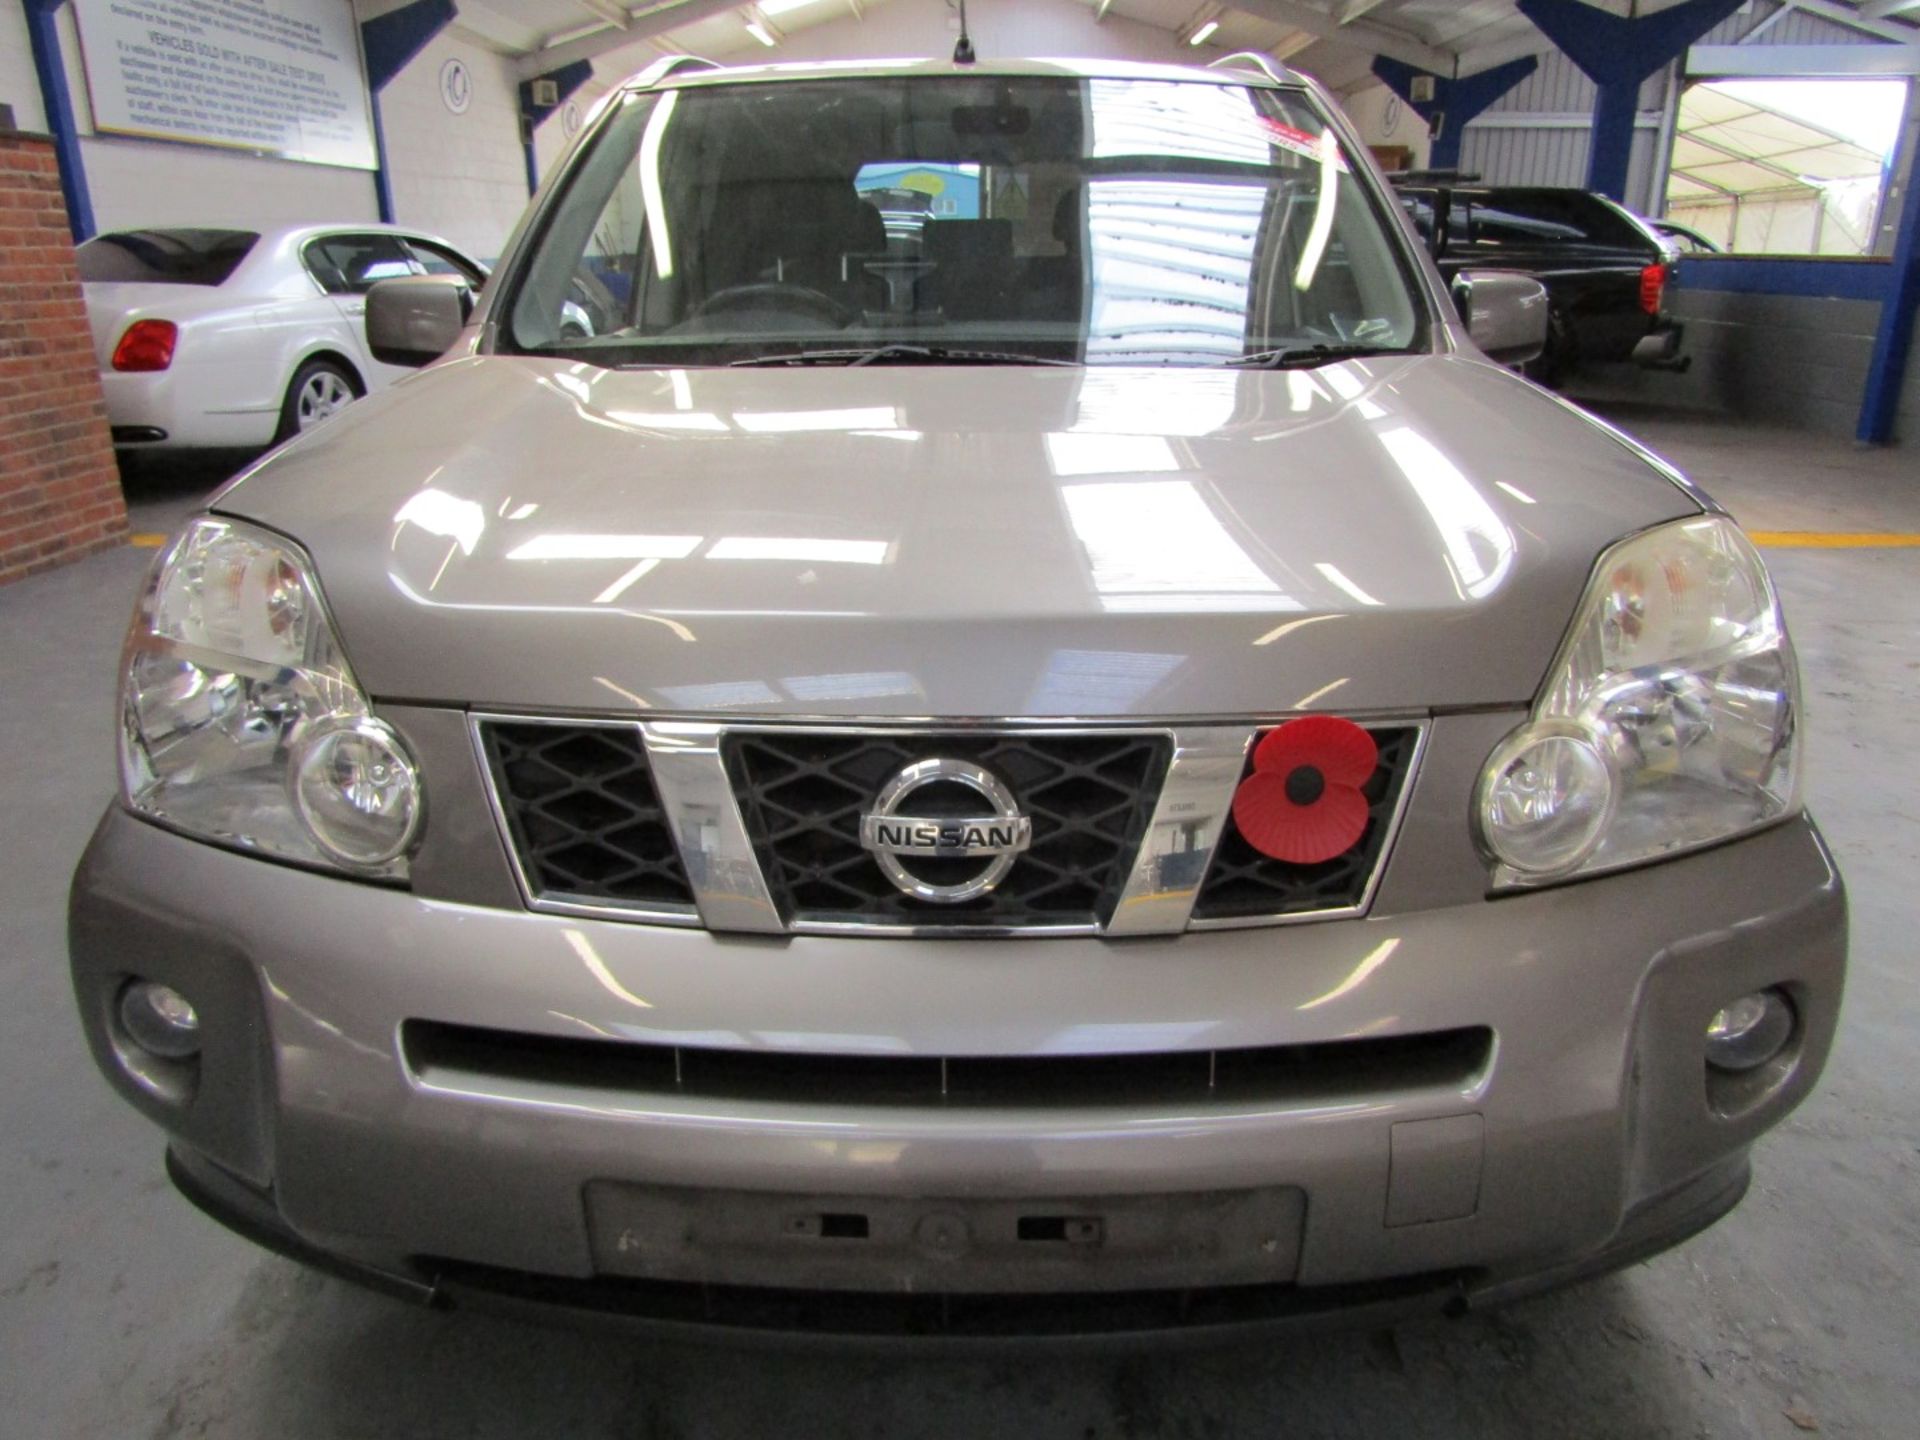 08 08 Nissan X-Trail Aventura DCI - Image 2 of 31